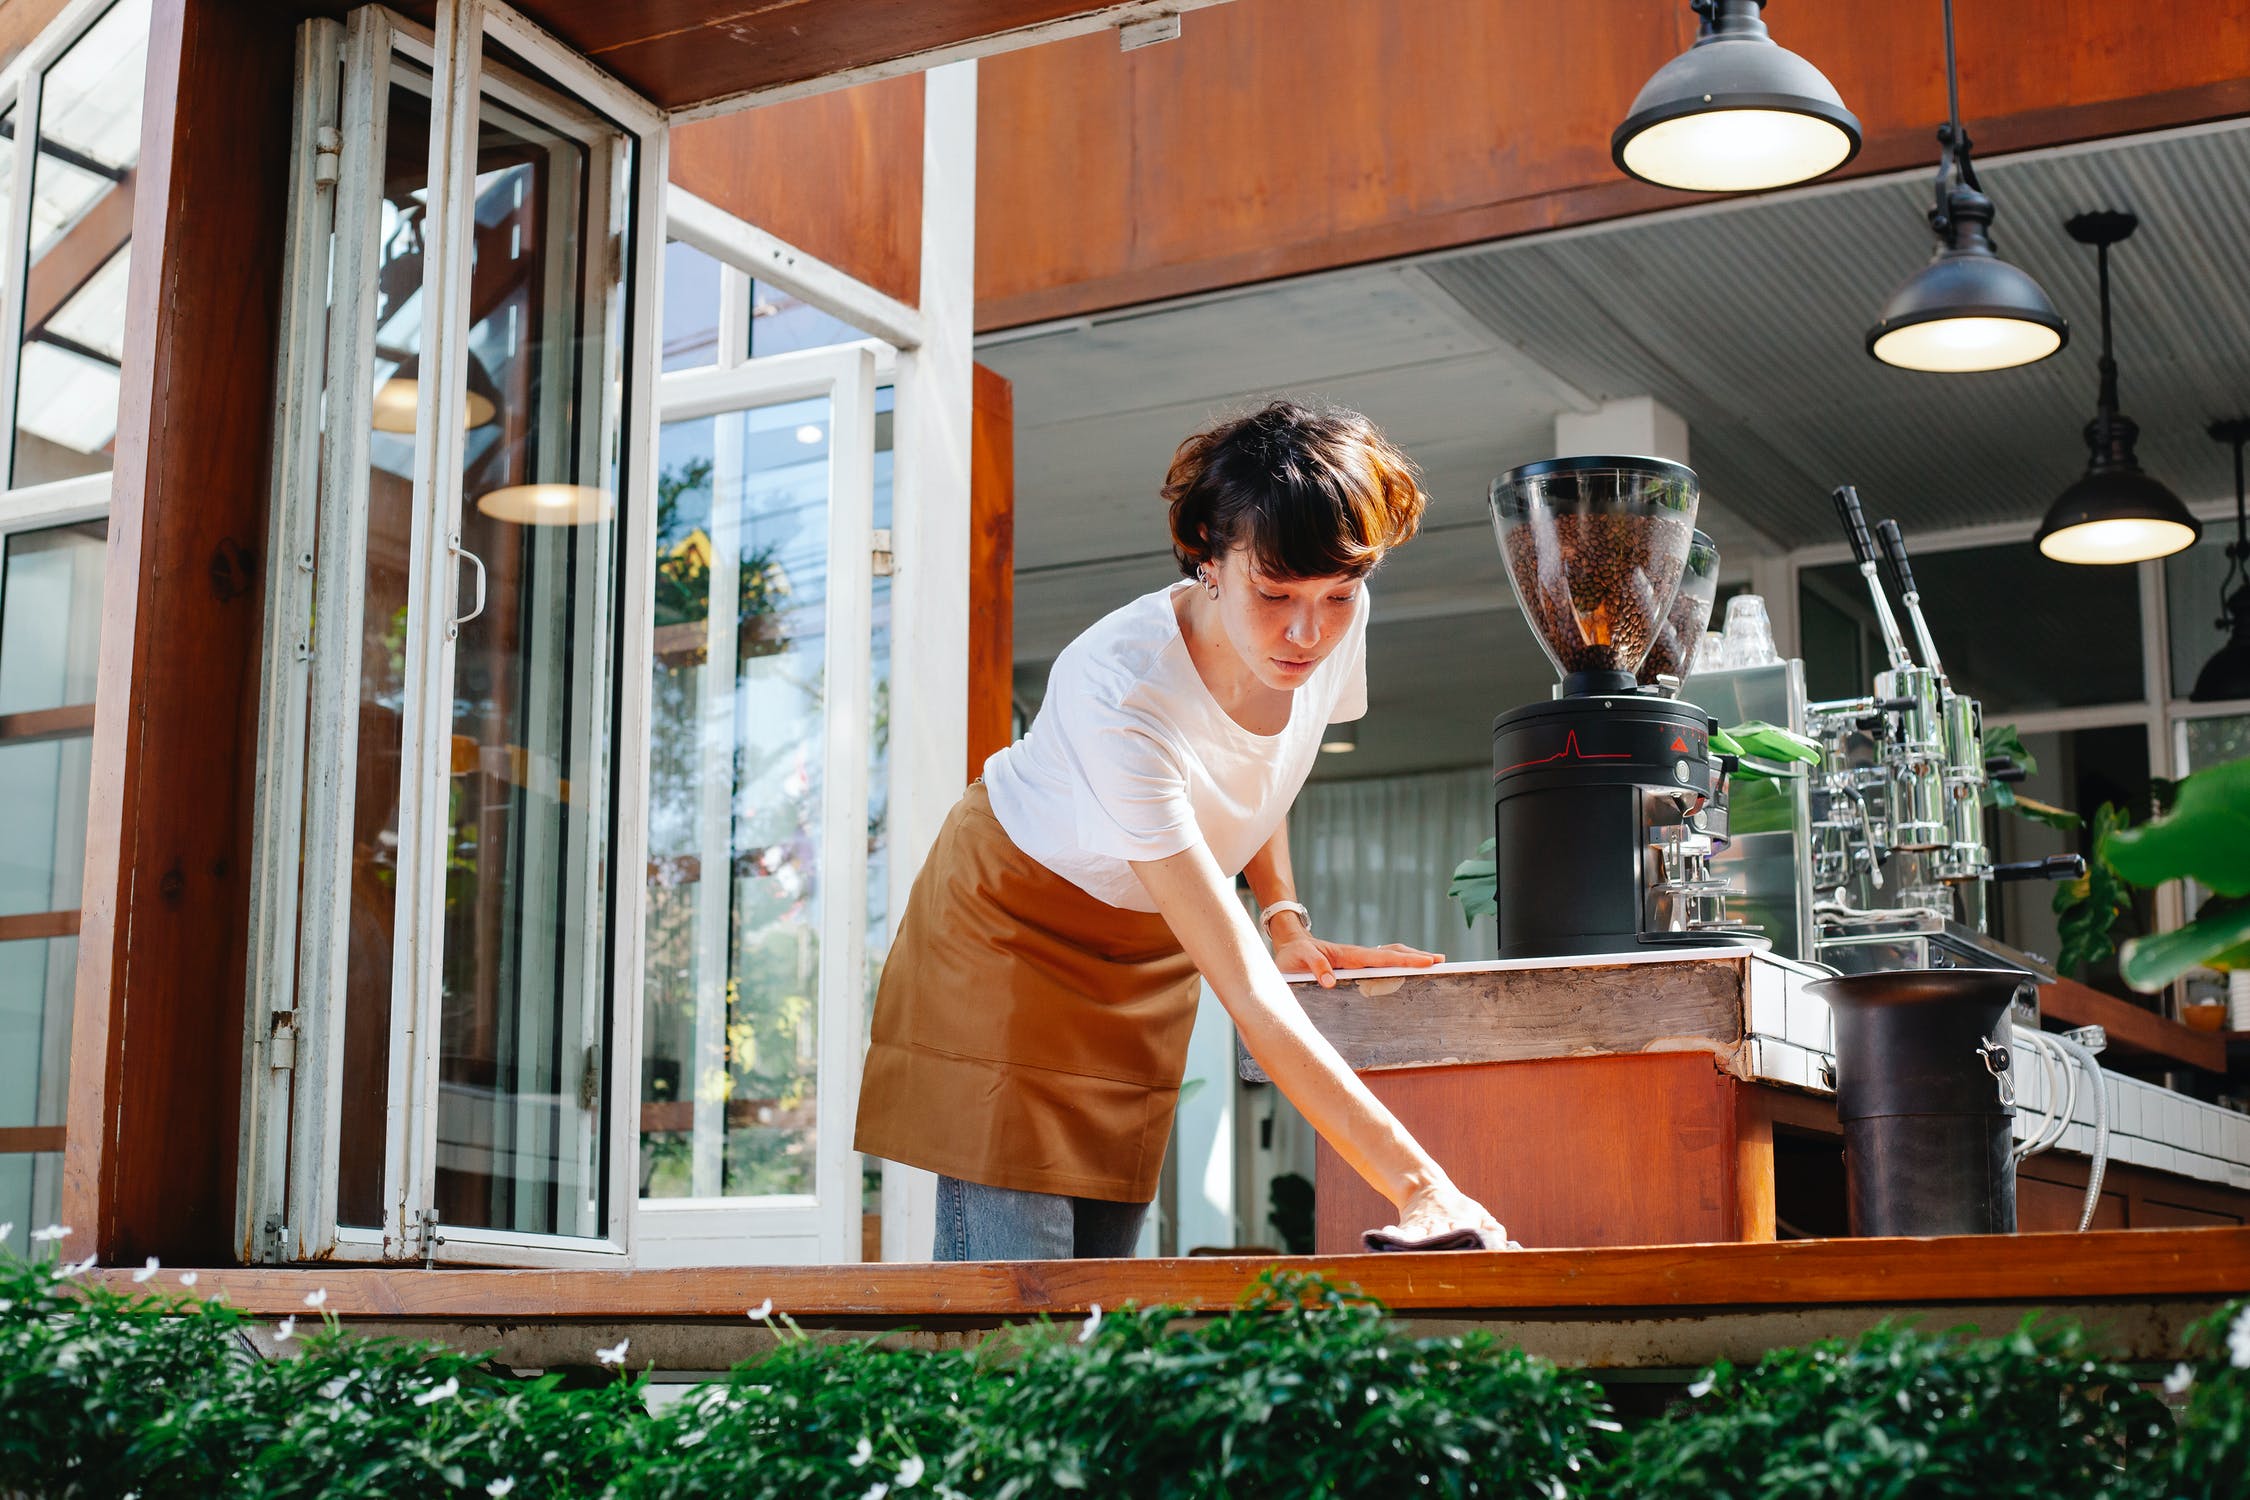 Working as a waitress | Source: Pexels